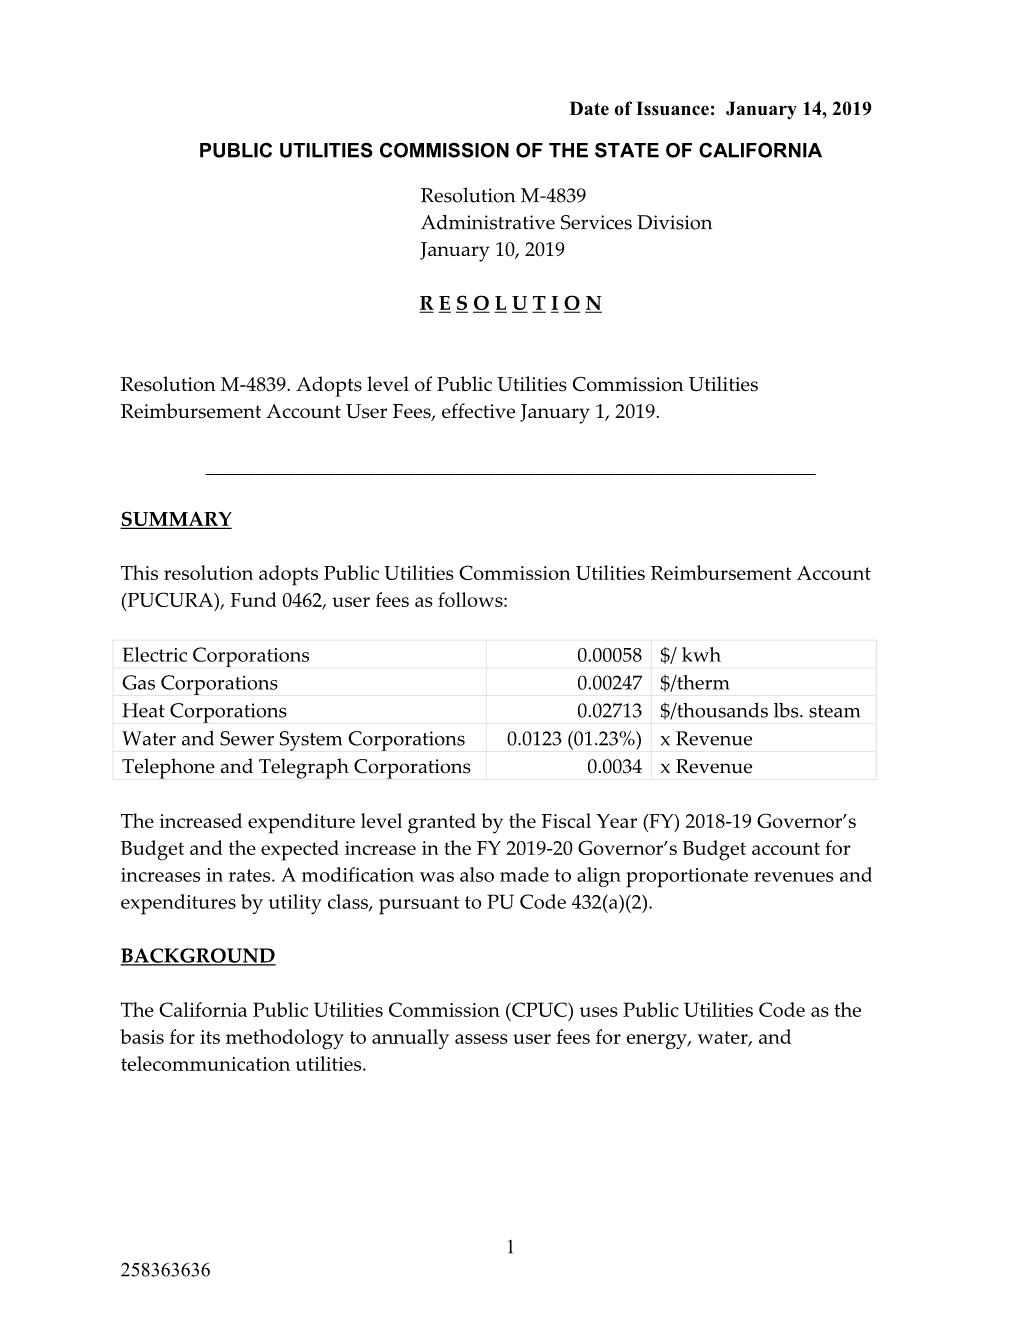 January 14, 2019 PUBLIC UTILITIES COMMISSION of the STATE OF